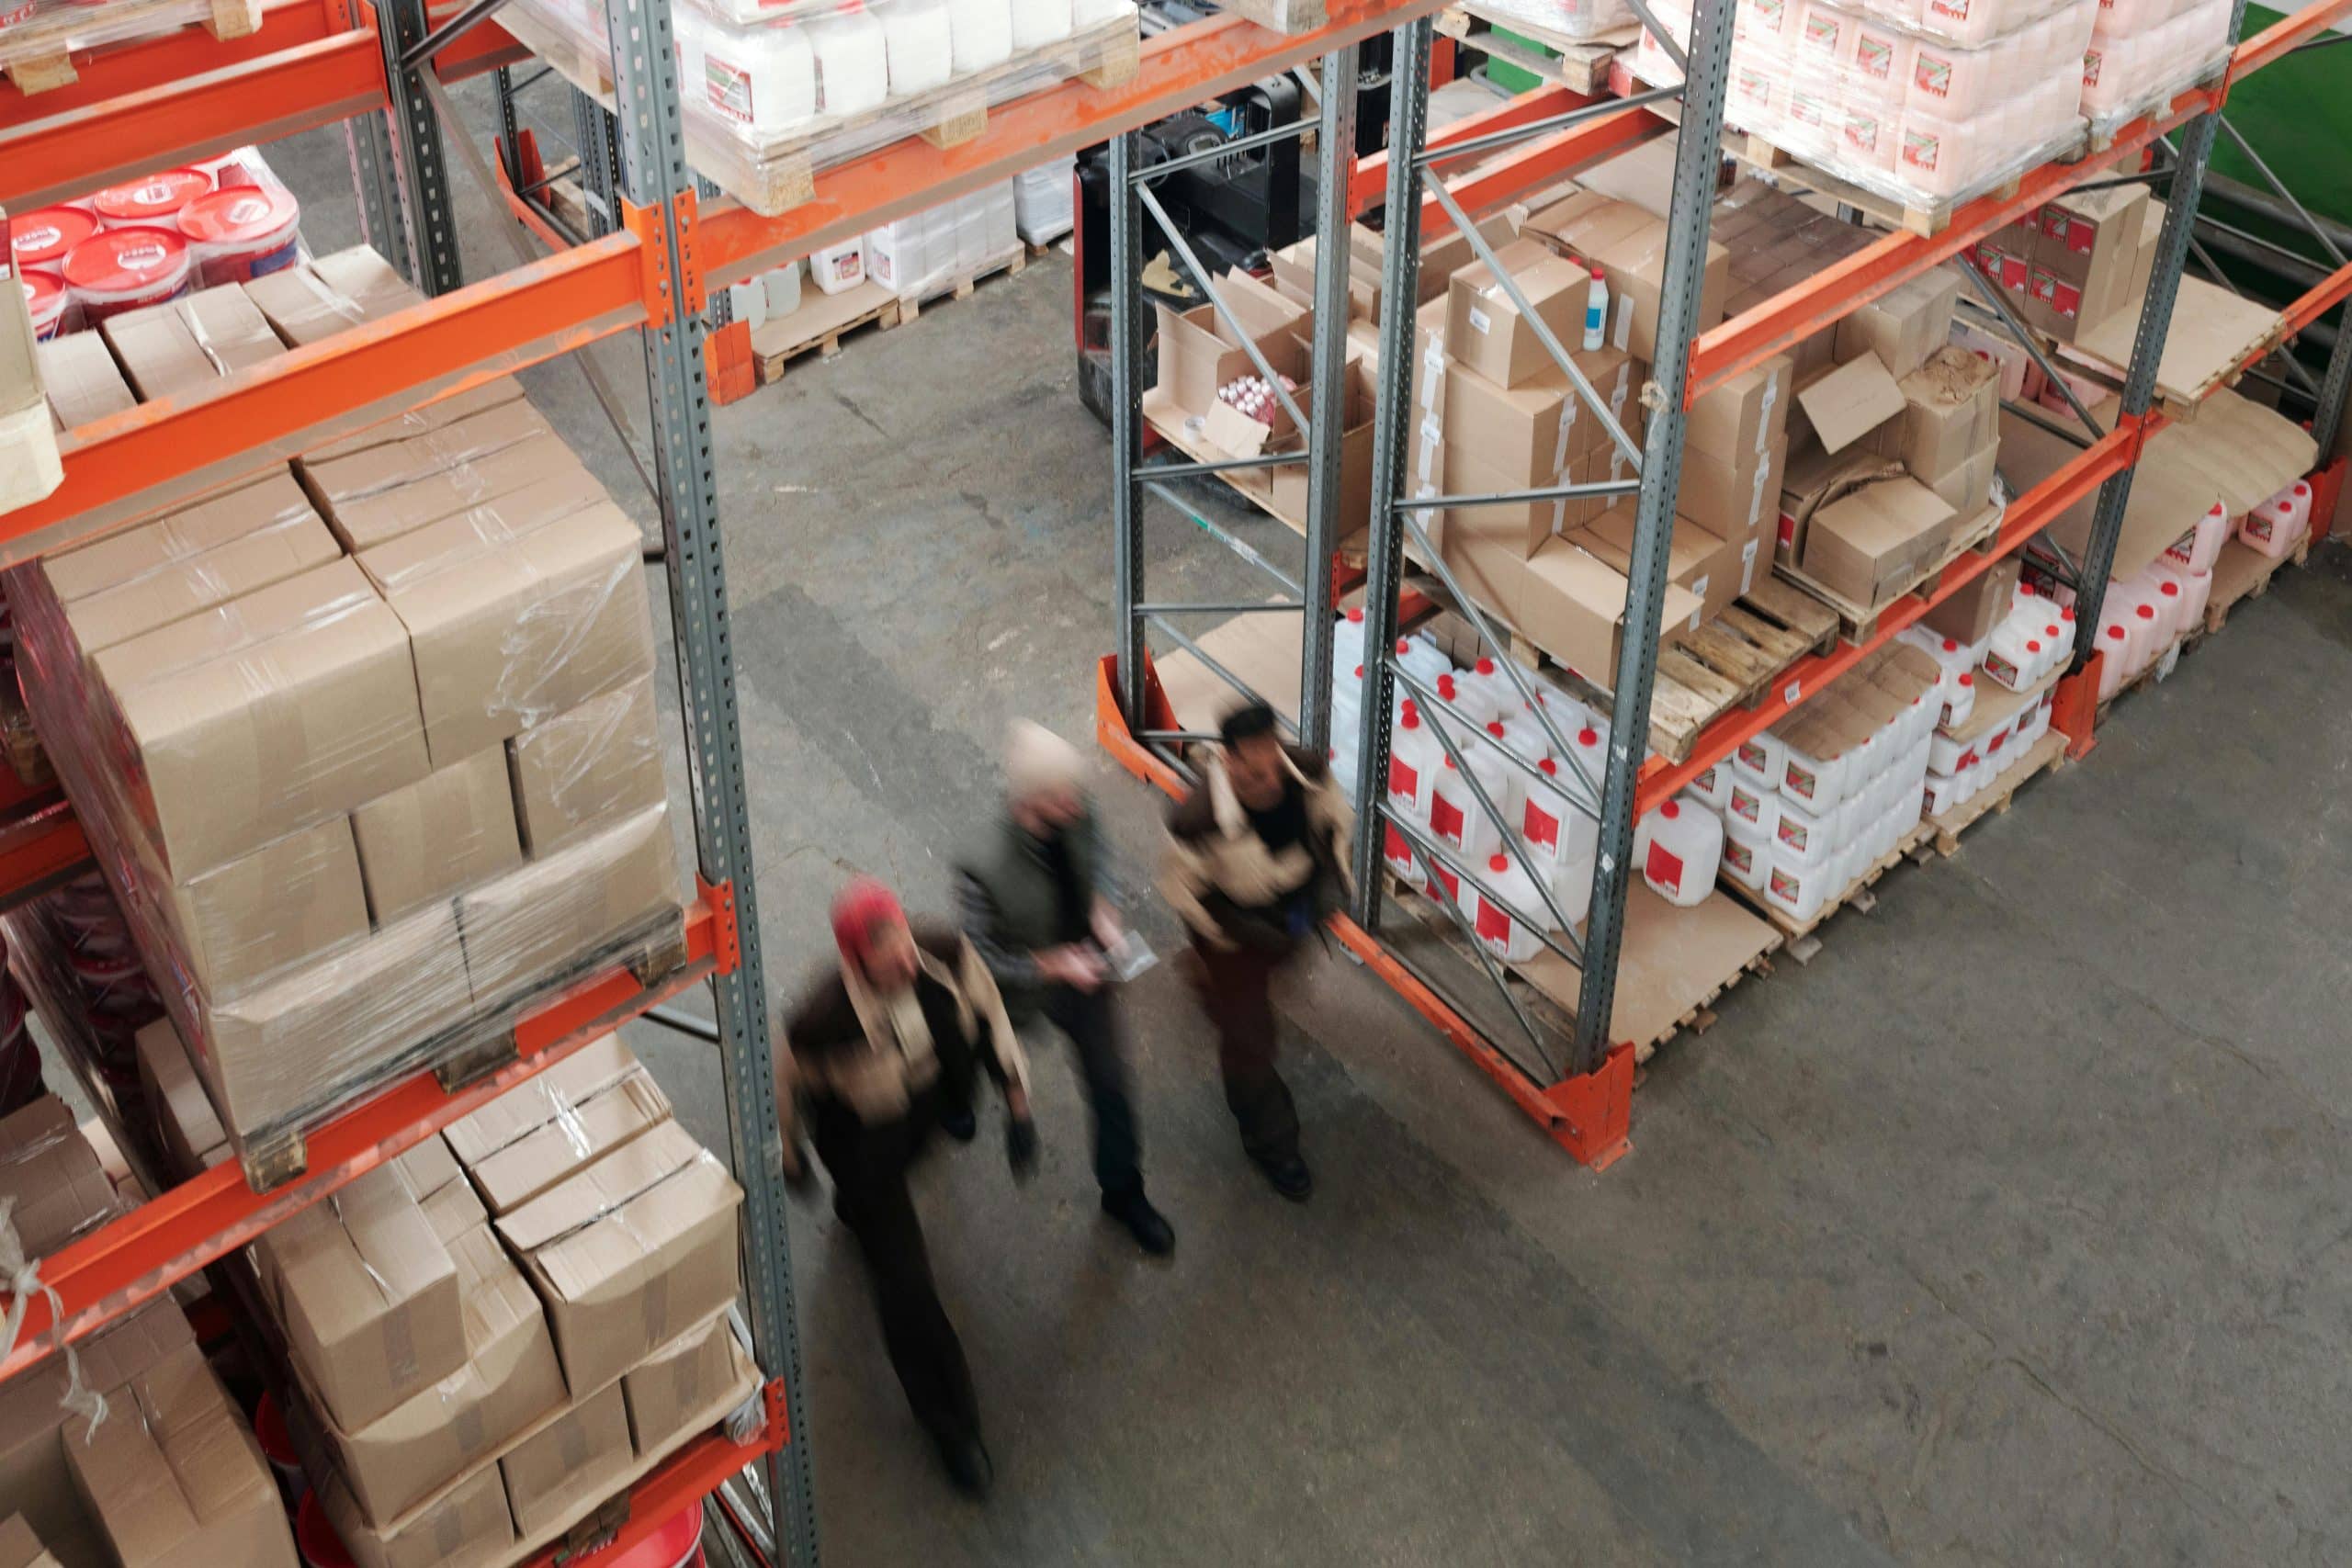 workers walking in a warehouse